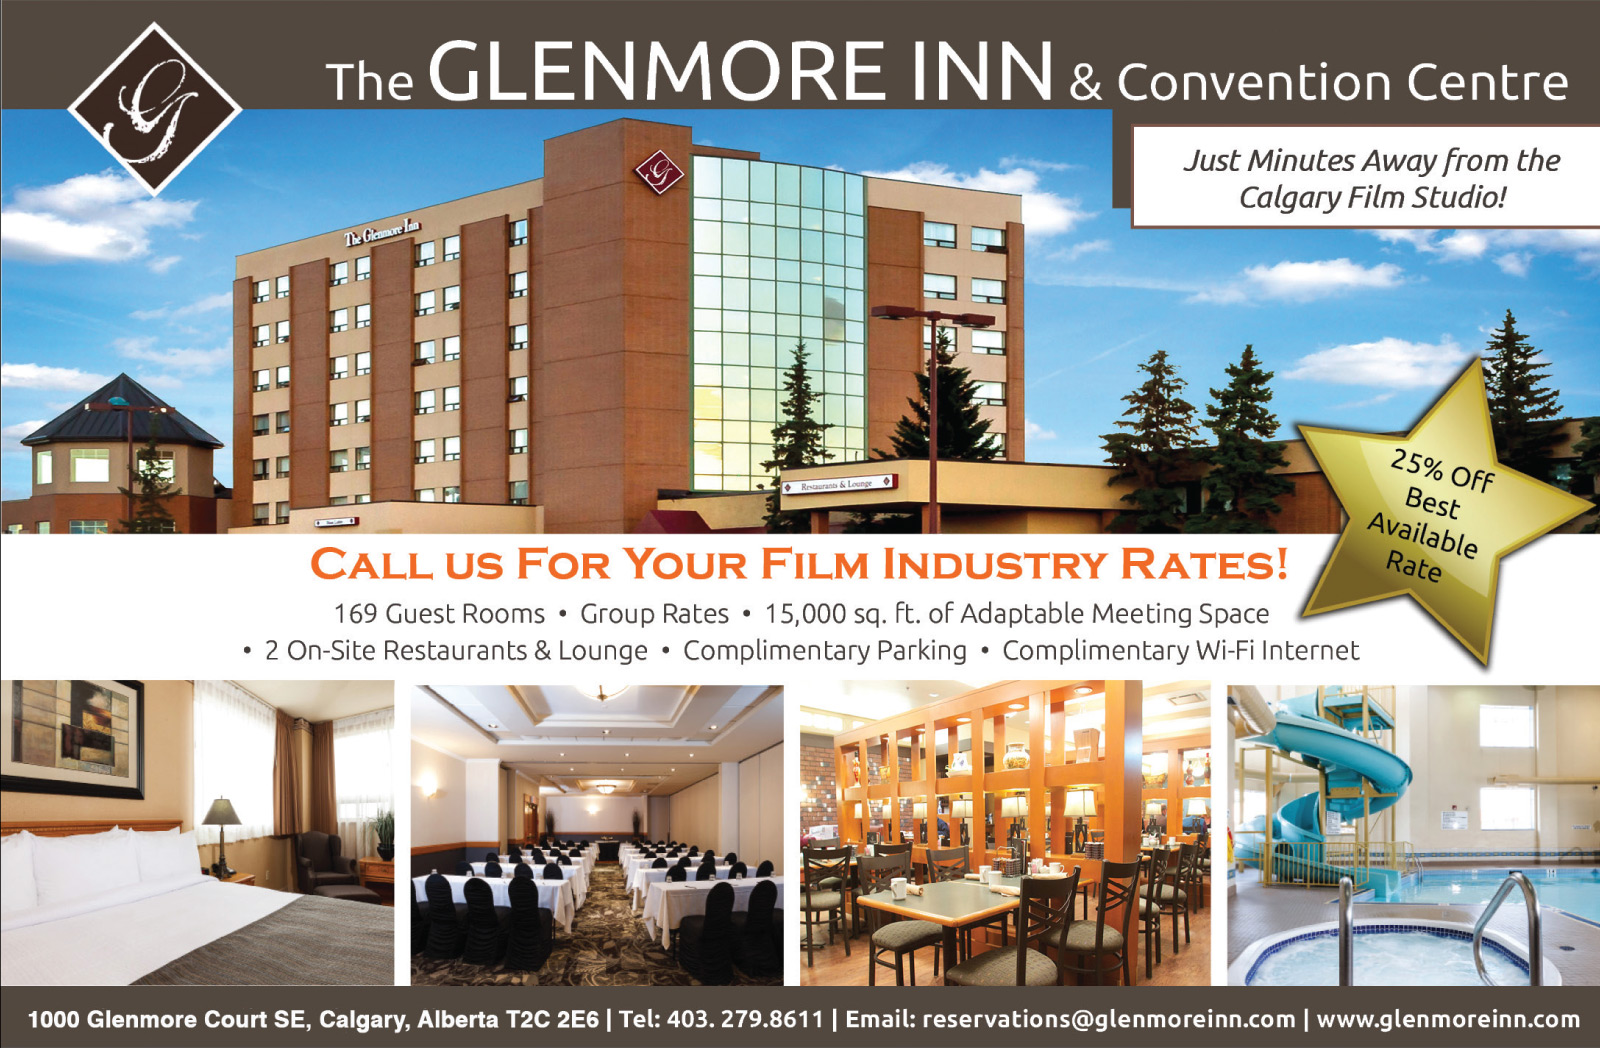 The Glenmore Inn & Convention Centre